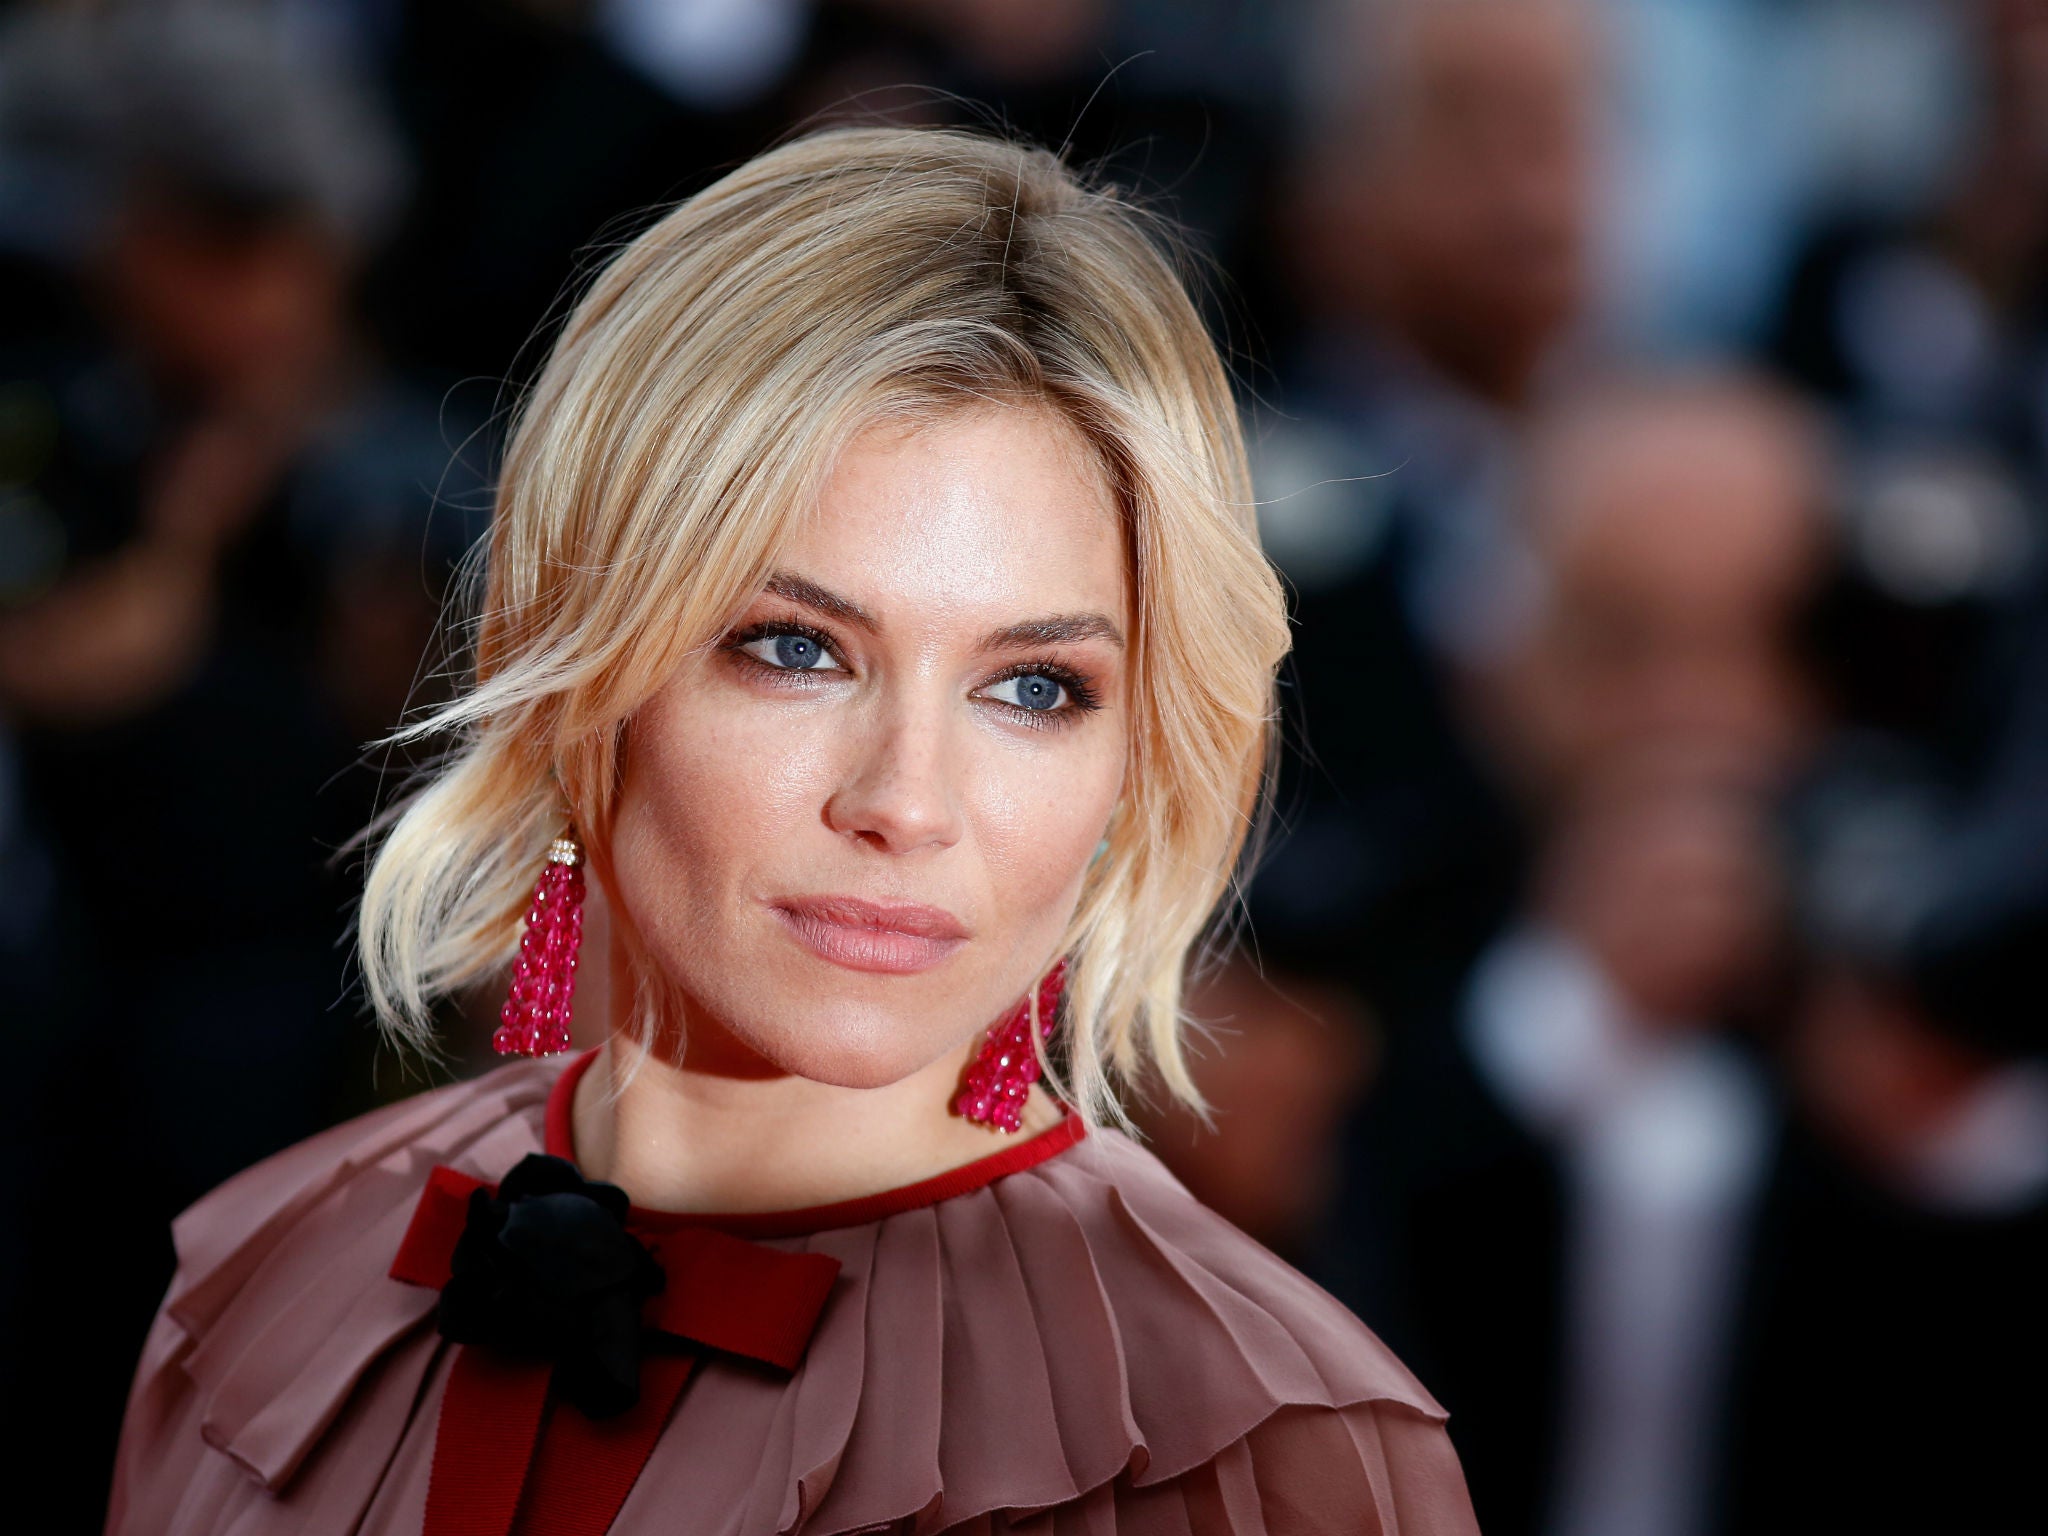 Sienna Miller filmed scenes for Black Mass but will not be in the final film